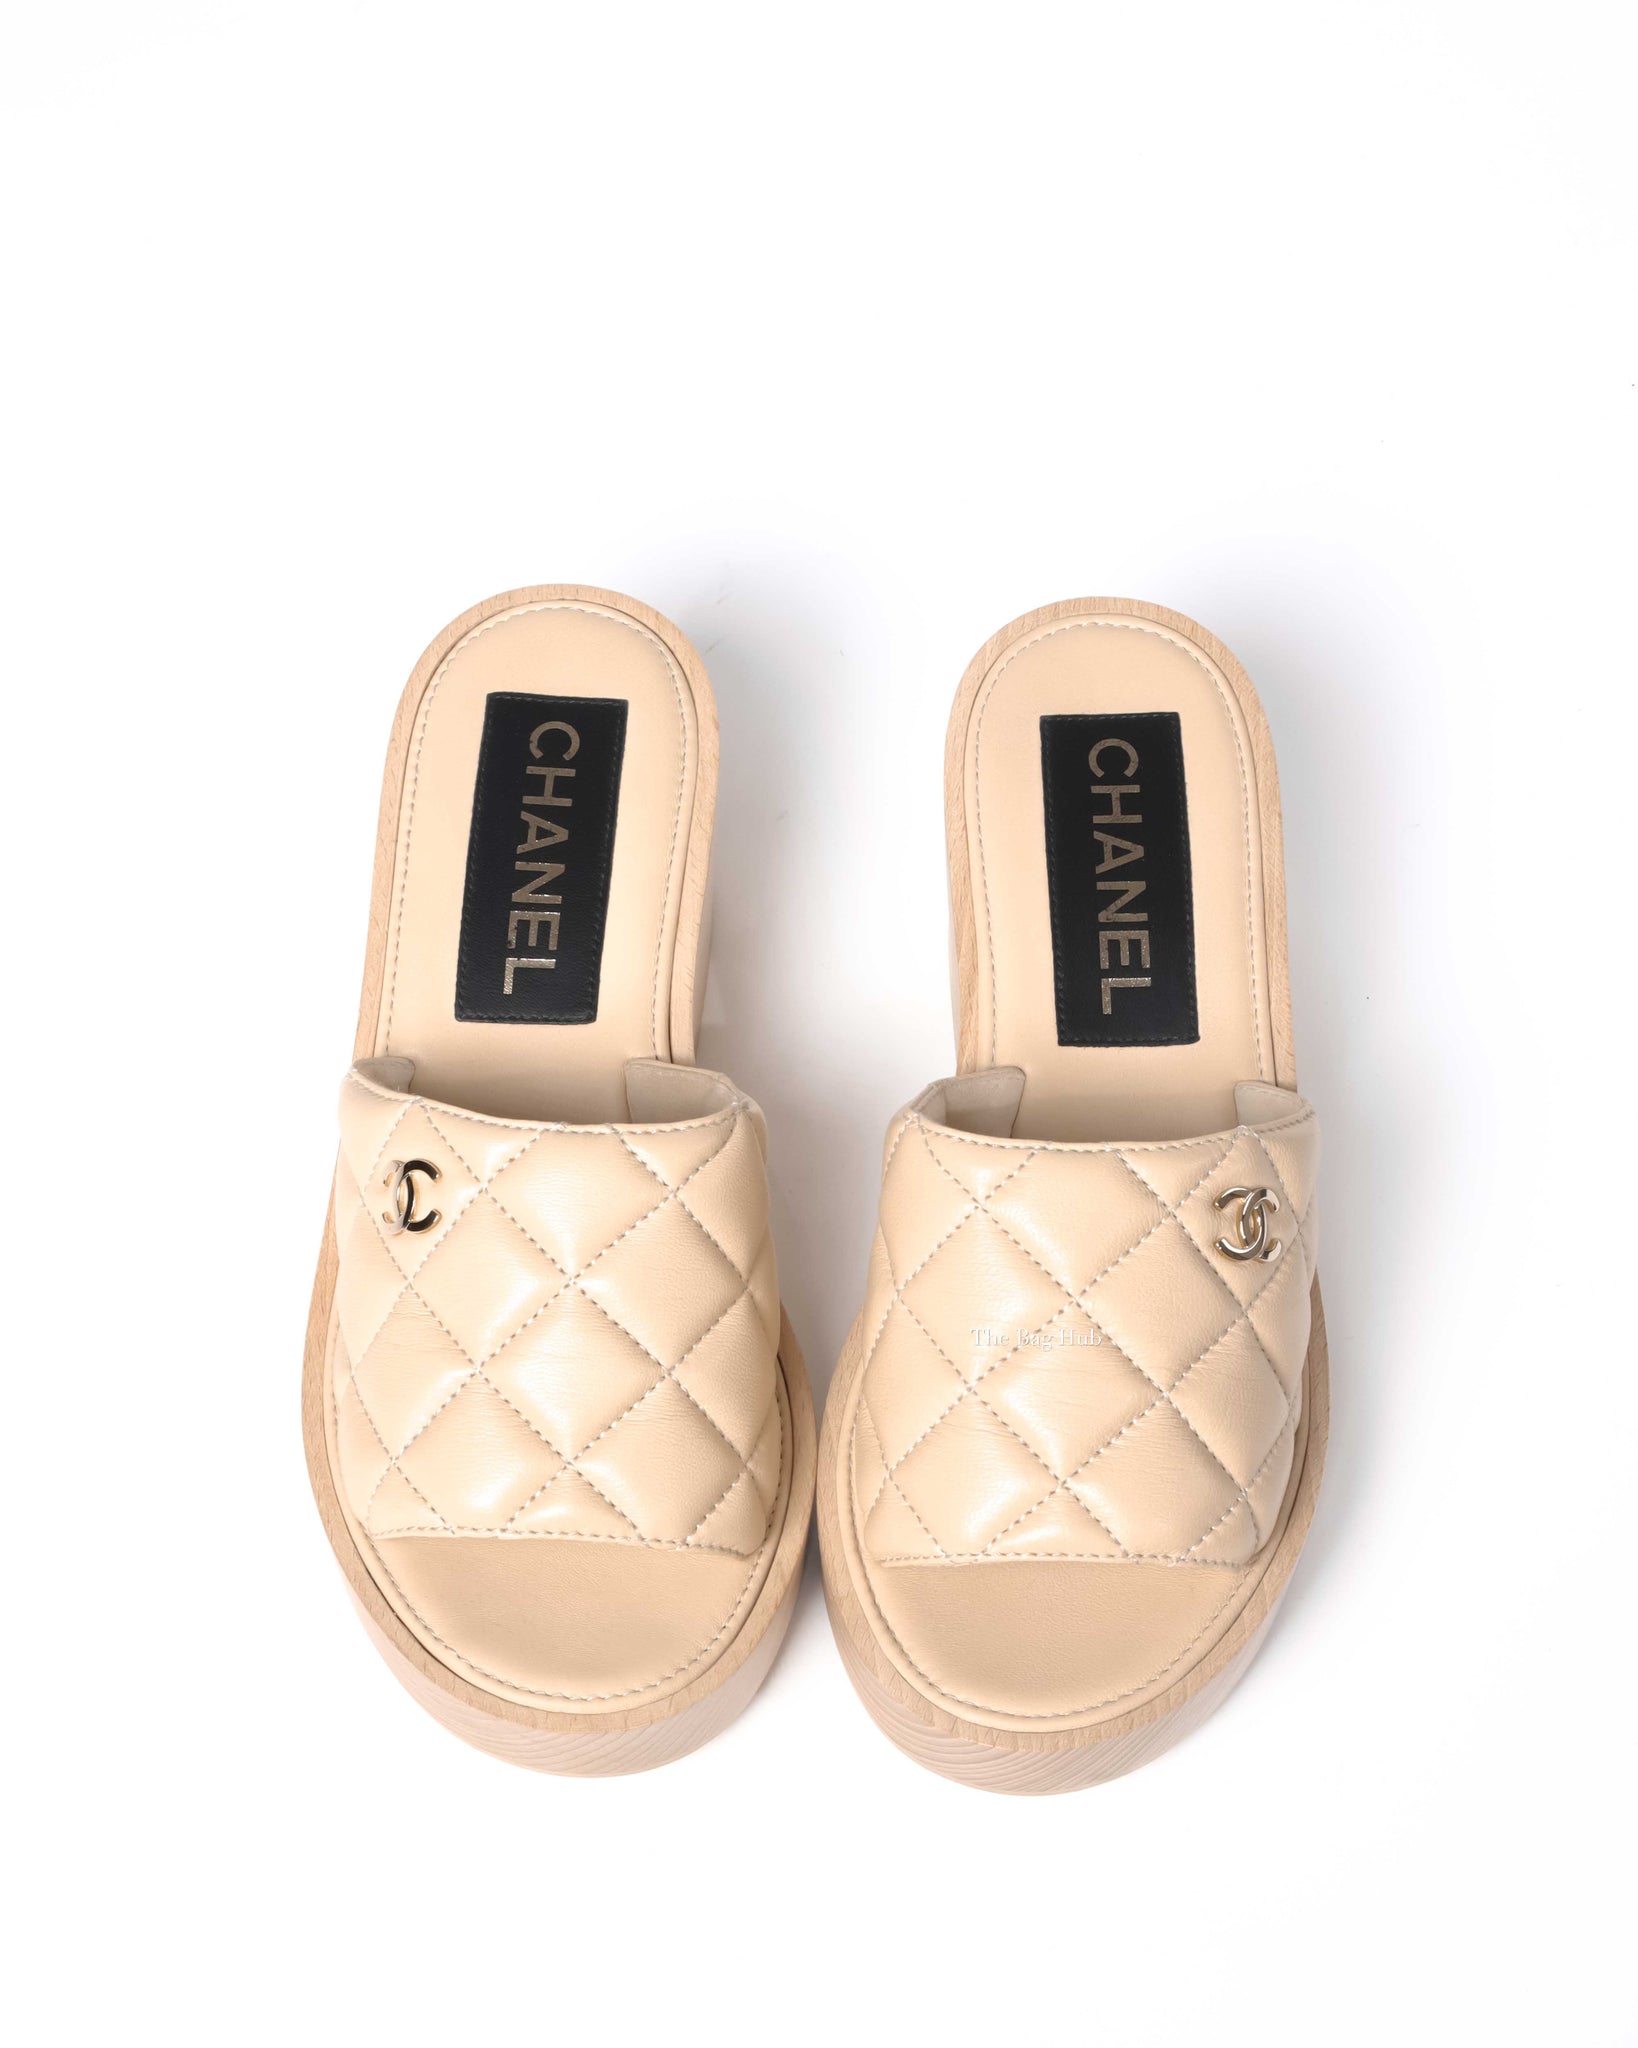 Chanel Beige Quilted Leather CC Wedge Sandals Size 37C, Designer Brand, Authentic Chanel